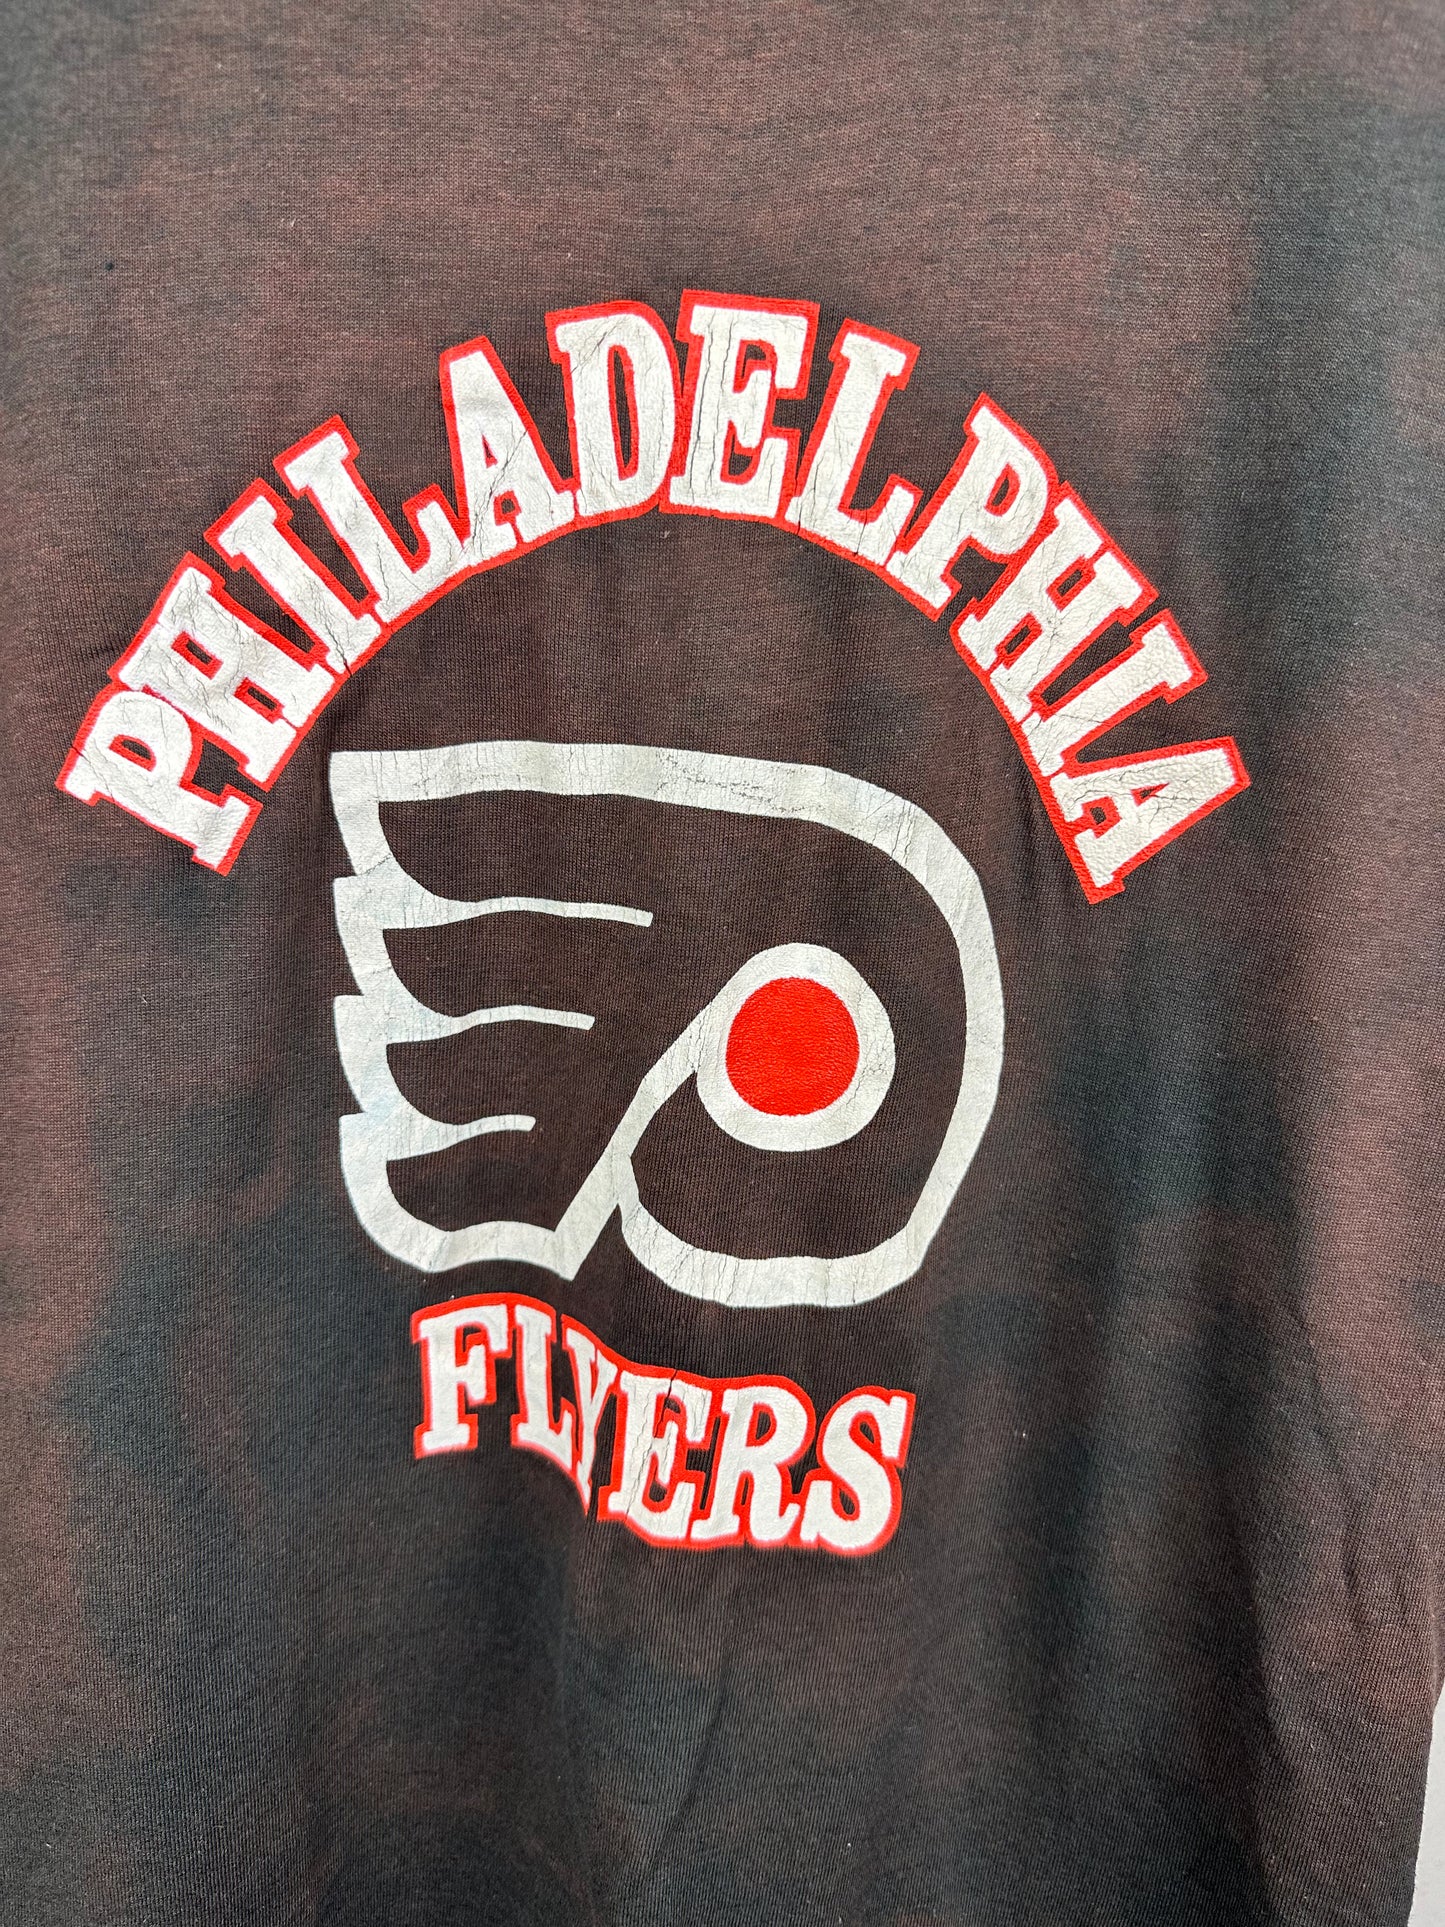 Vintage Philly Flyers T-shirt